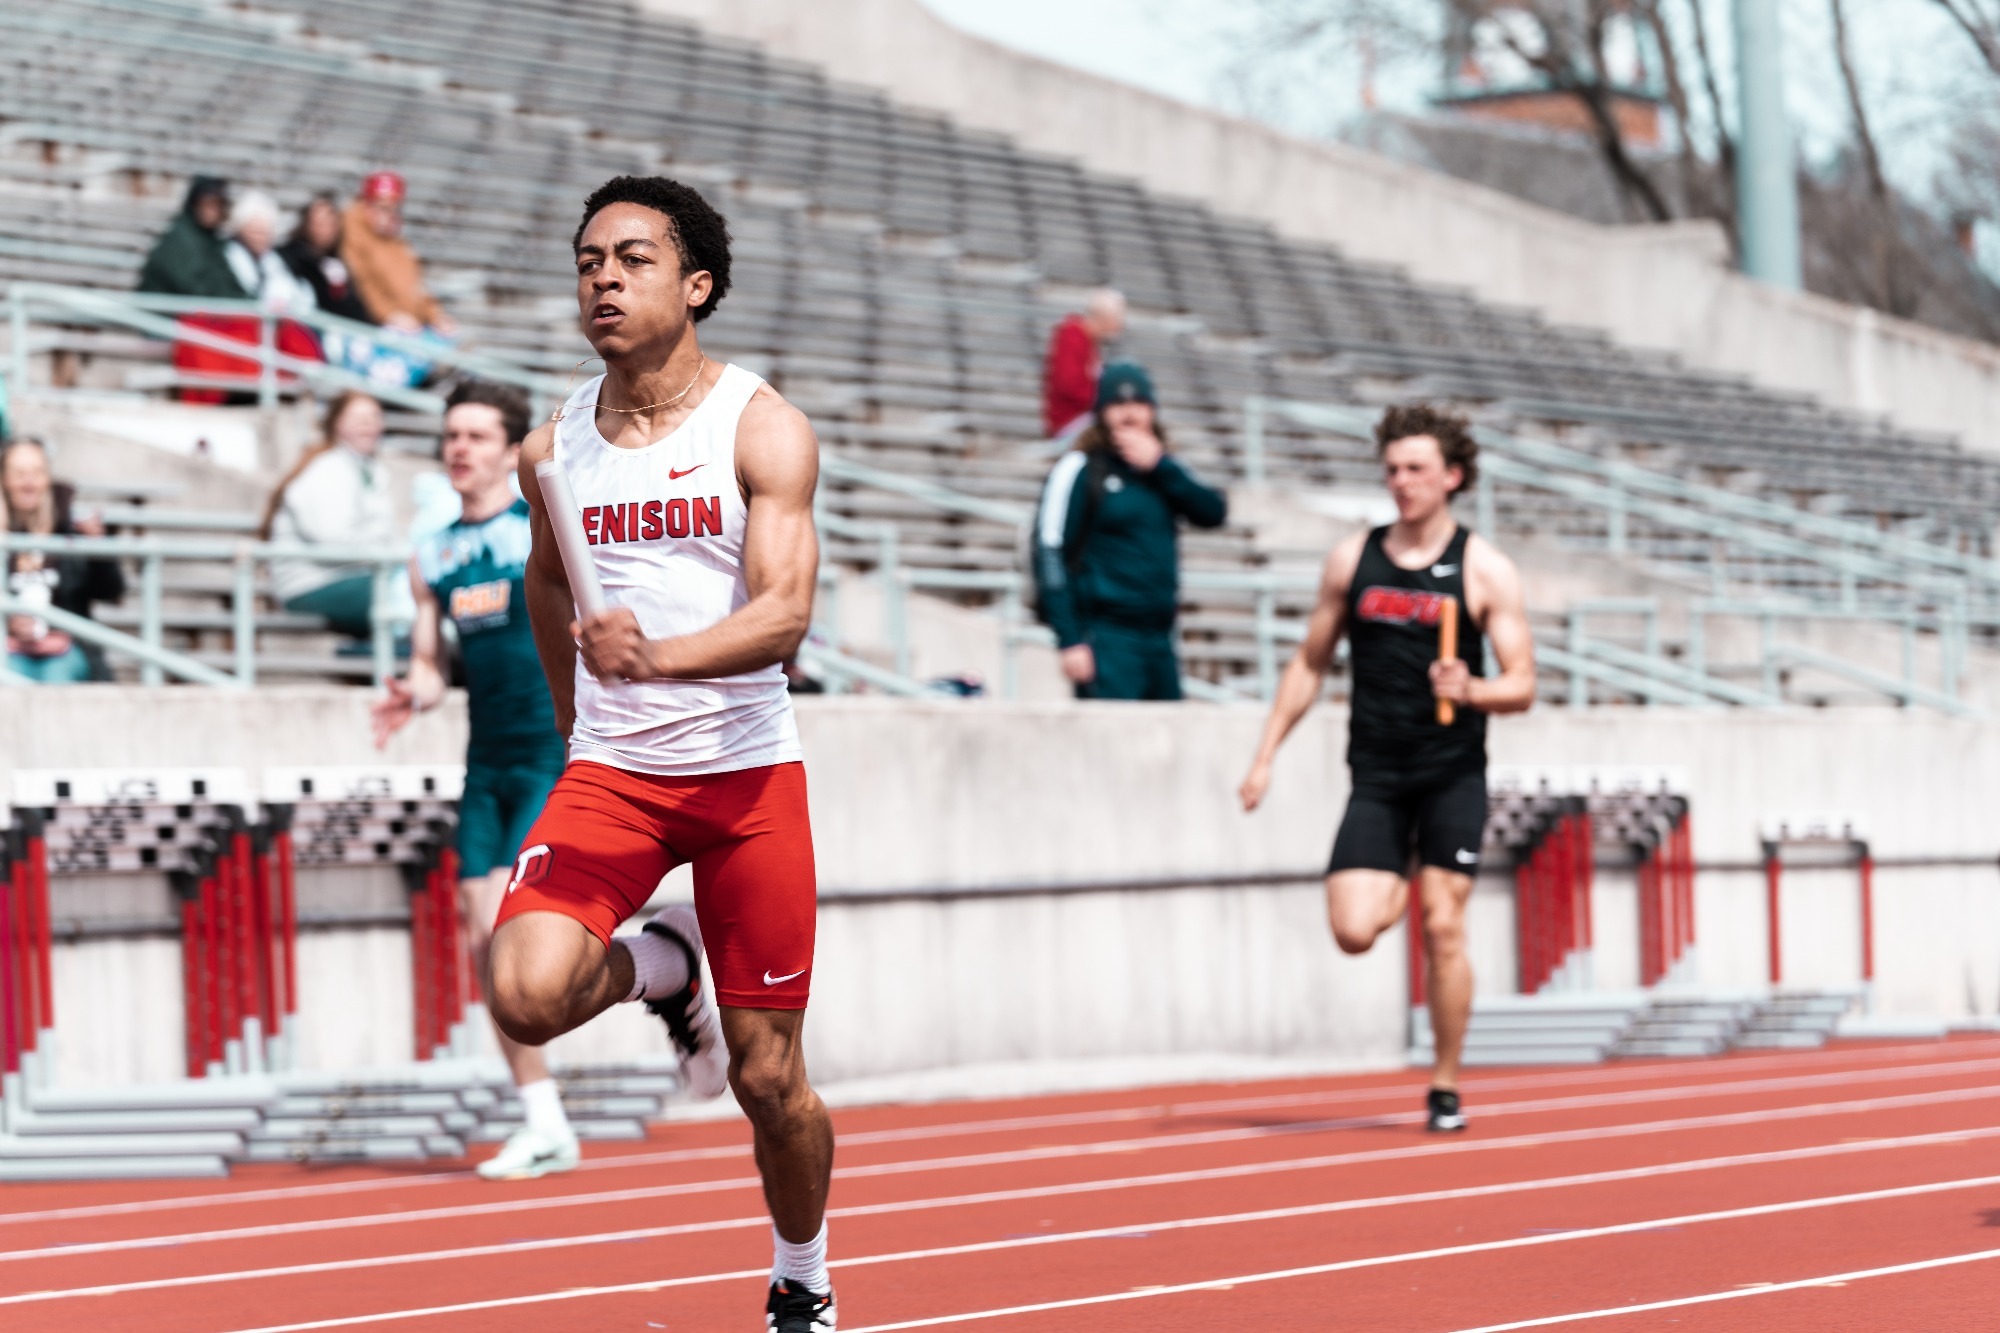 Men's Track & Field finishes second at OWU - Denison University